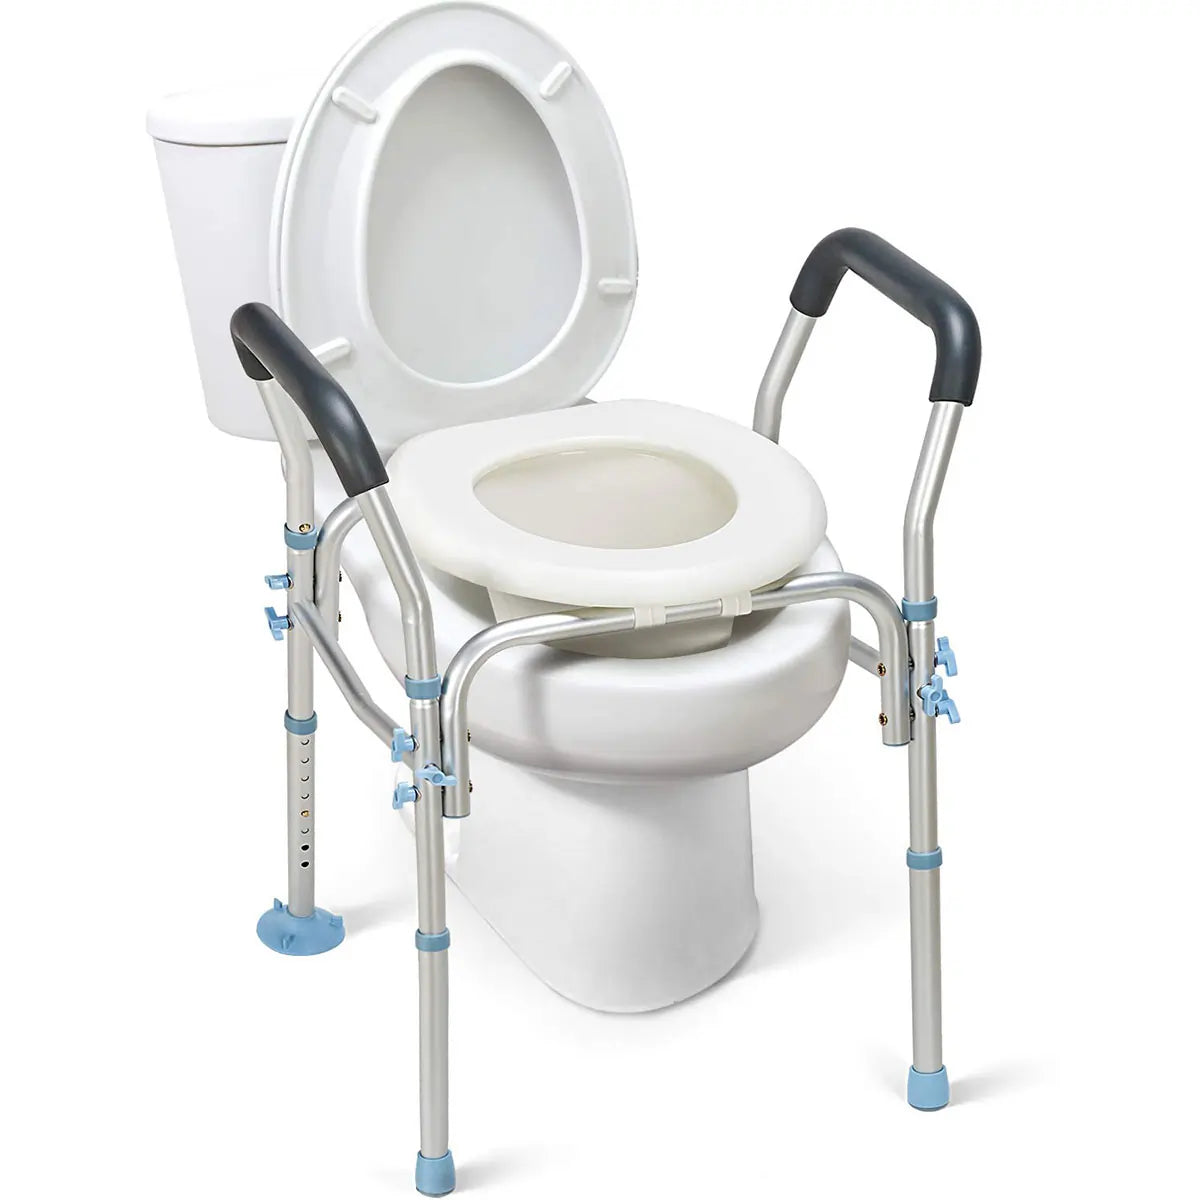 300LBS Capacity Raised Toilet Seat with Arms